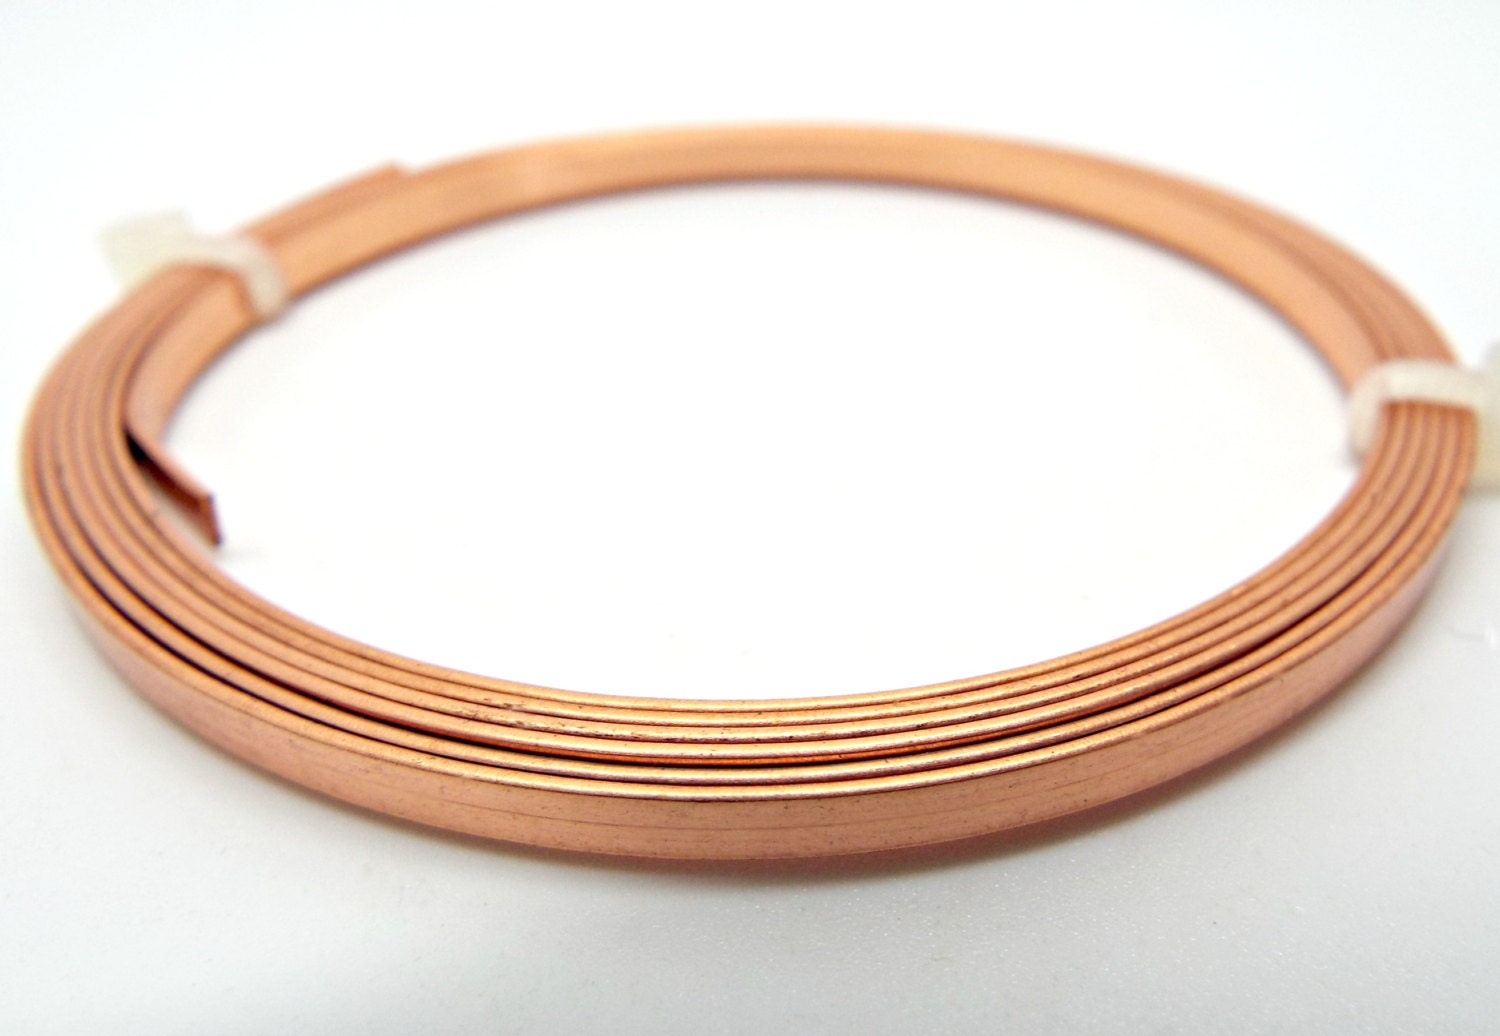 Flat Copper Wire, Flat Wire, Copper Tape, Copper Wire Tape, 1 Metre Flat  Wire, 3mm X 0.75mm Wire, Jewelry Wire, Wire Wrapping, UK Seller 